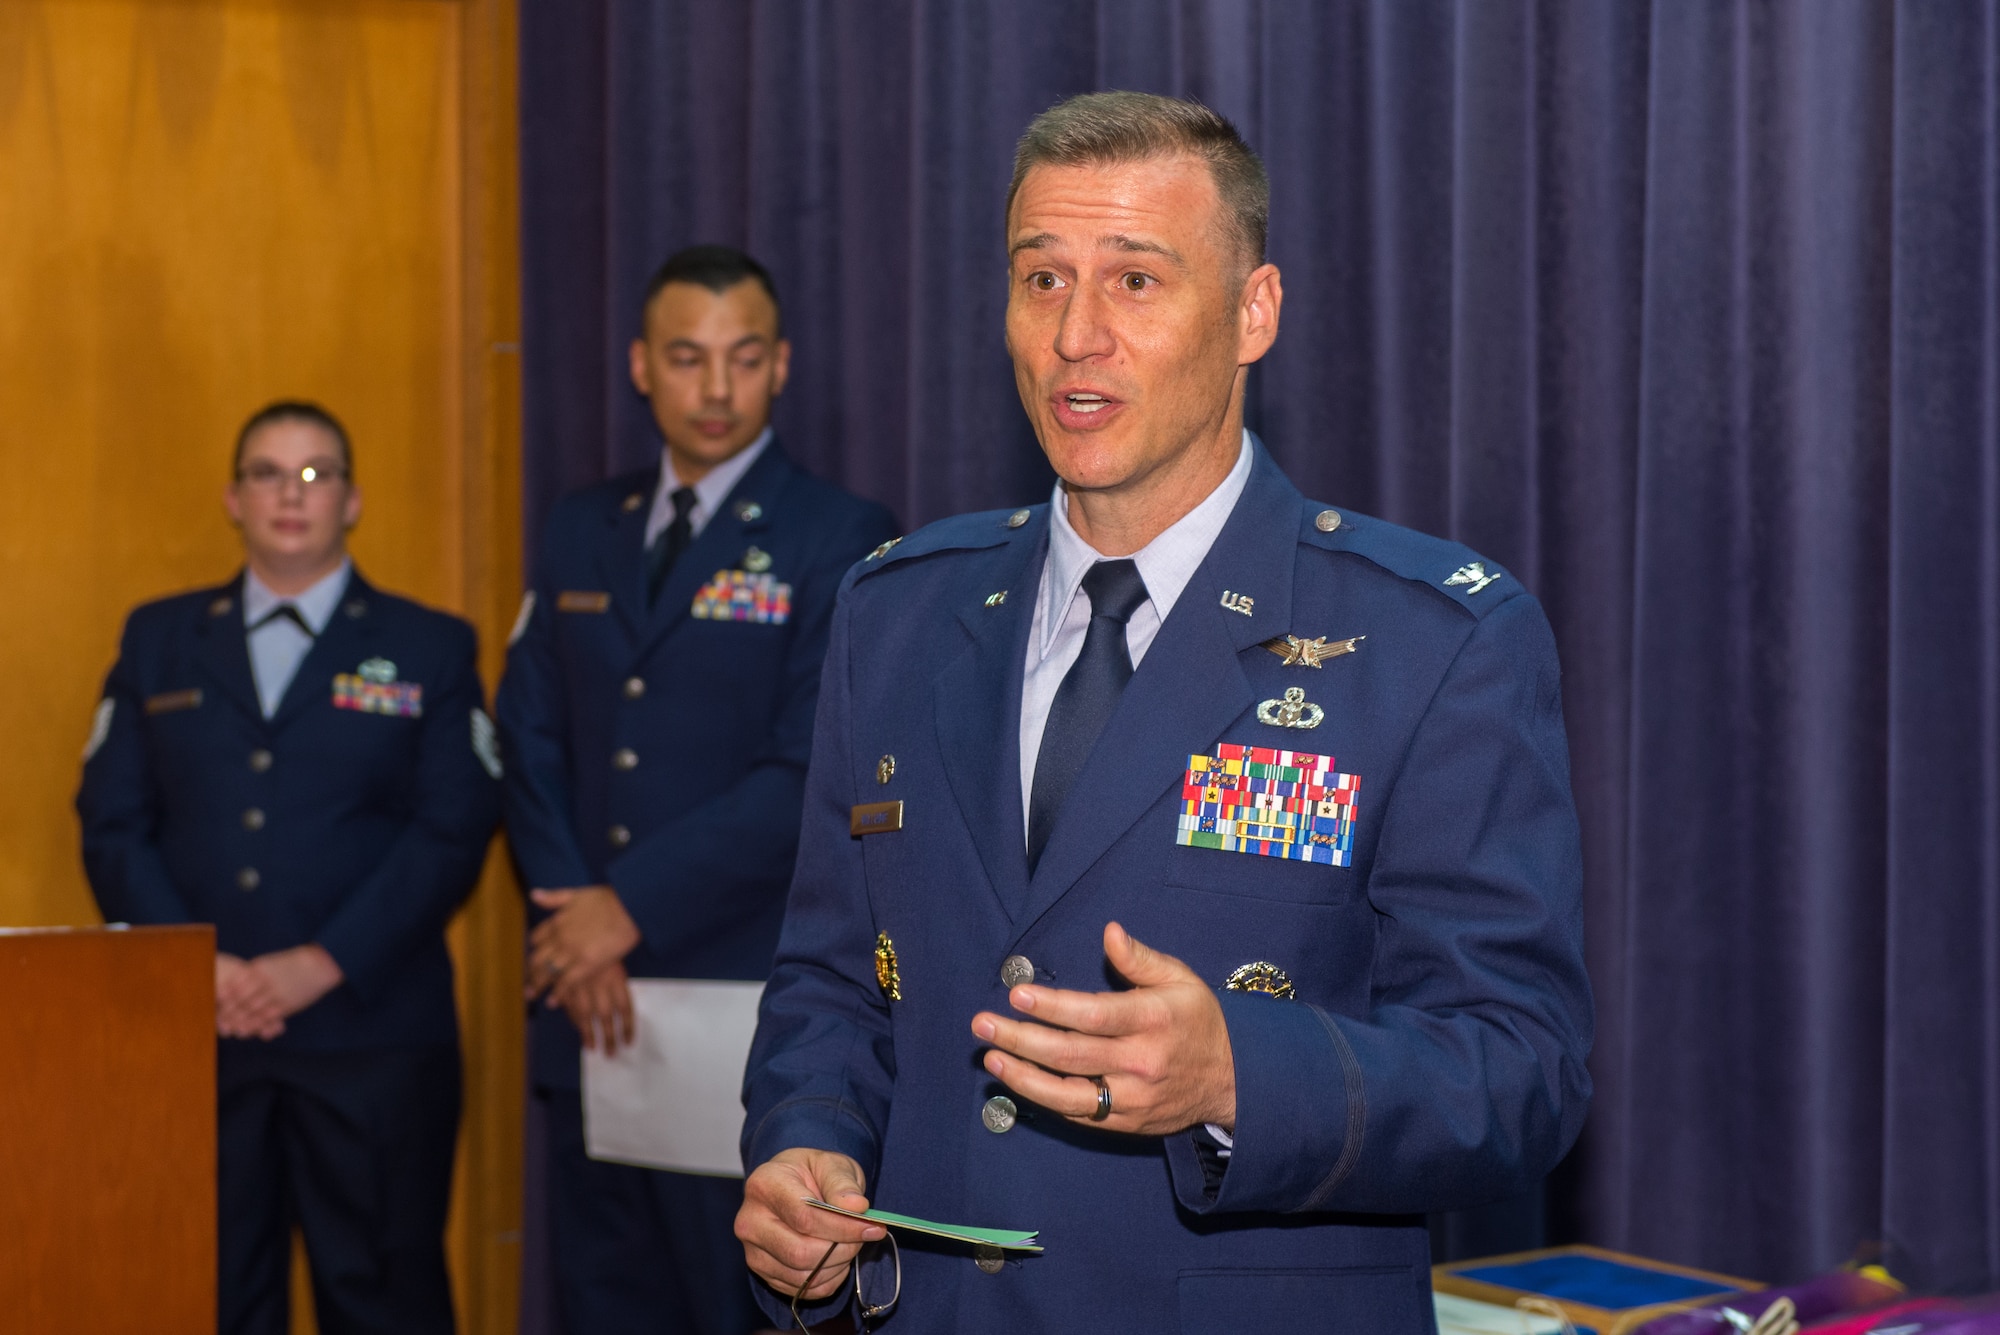 U.S. Air Force Col. Patrick Williams, 2nd Weather Group (WXG) commander, 557th Weather Wing, speaks during a change of command ceremony July 11, 2018, at Offutt Air Force Base, Nebraska. Prior to taking command of the 2nd WXG, Williams was the Joint Staff Space Branch chief as well as the Joint Staff Meteorological and Oceanographic Operations officer. (U.S. Air Force photo by Paul Shirk)